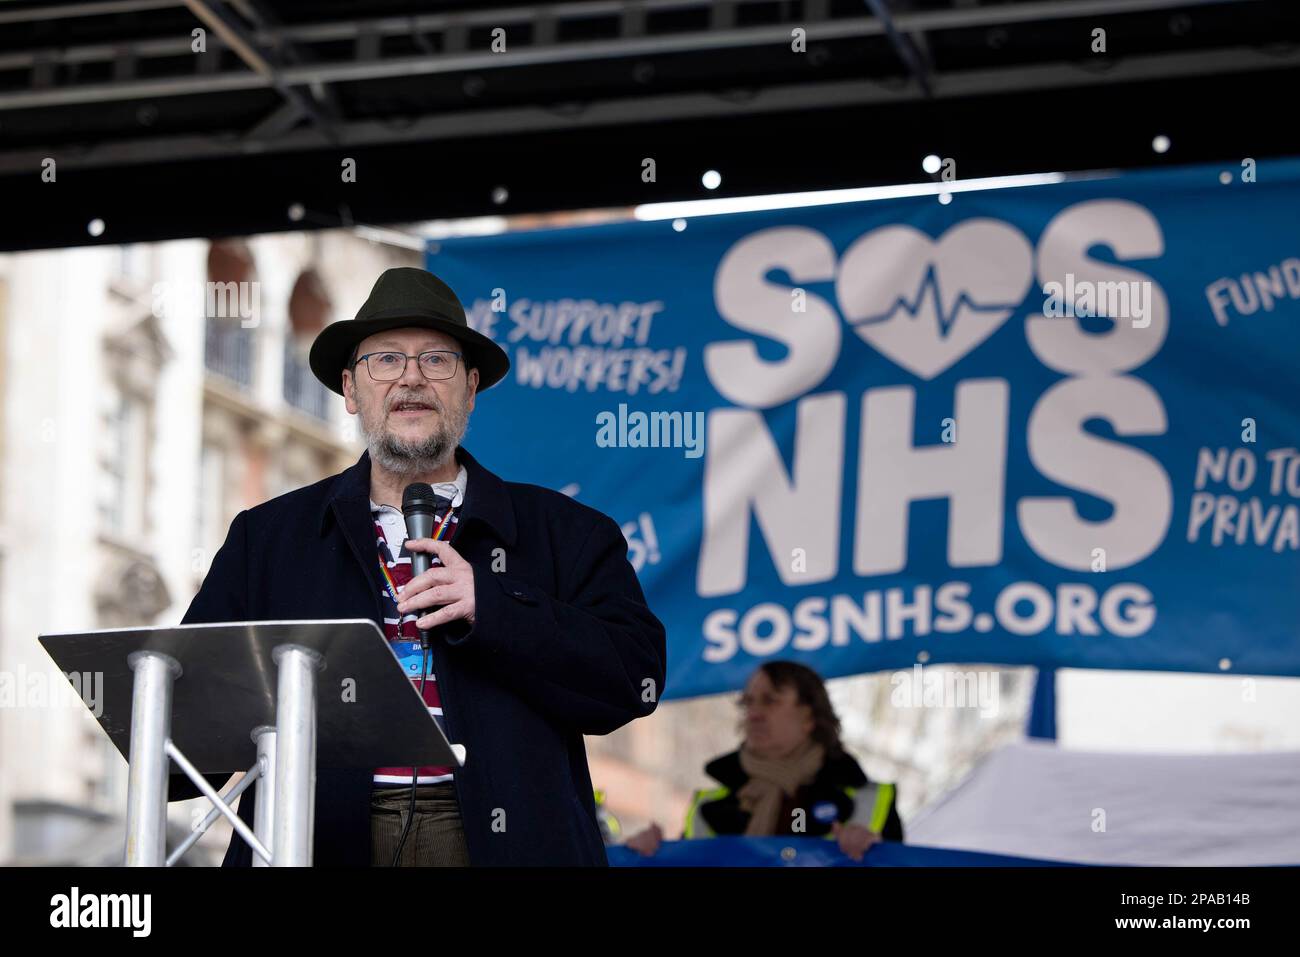 Professor Philip Banfield, a Consultant Obstetrician and Gynecologists' in North Wales and the Council Chair of the British Medical Association, is seen giving a speech during the demonstration. SOS NHS campaign group and other trade unions organised a march from University College London Hospital to Downing Street to demand emergency funding for the National Health Service (NHS) from the UK Government to support services and staff and not to privatise the healthcare sector ahead of the Chancellor's spring budget on 15th March 2023. Stock Photo